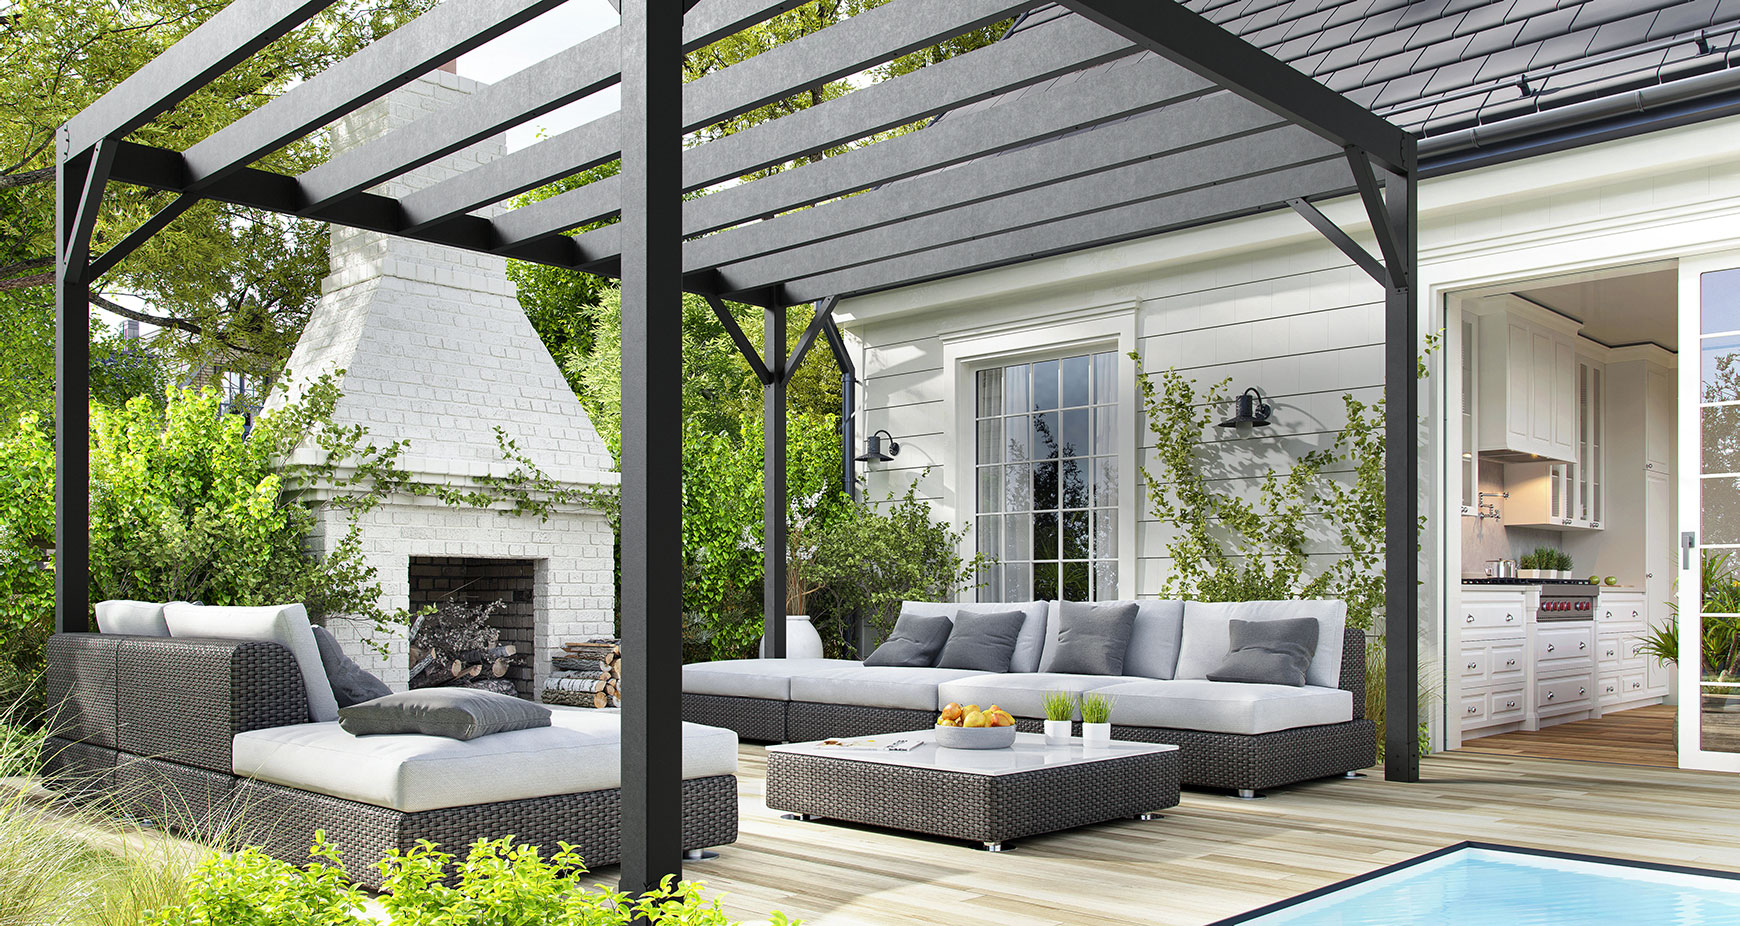 Steel pergola adjacent to pool, with fireplace and outdoor couches.